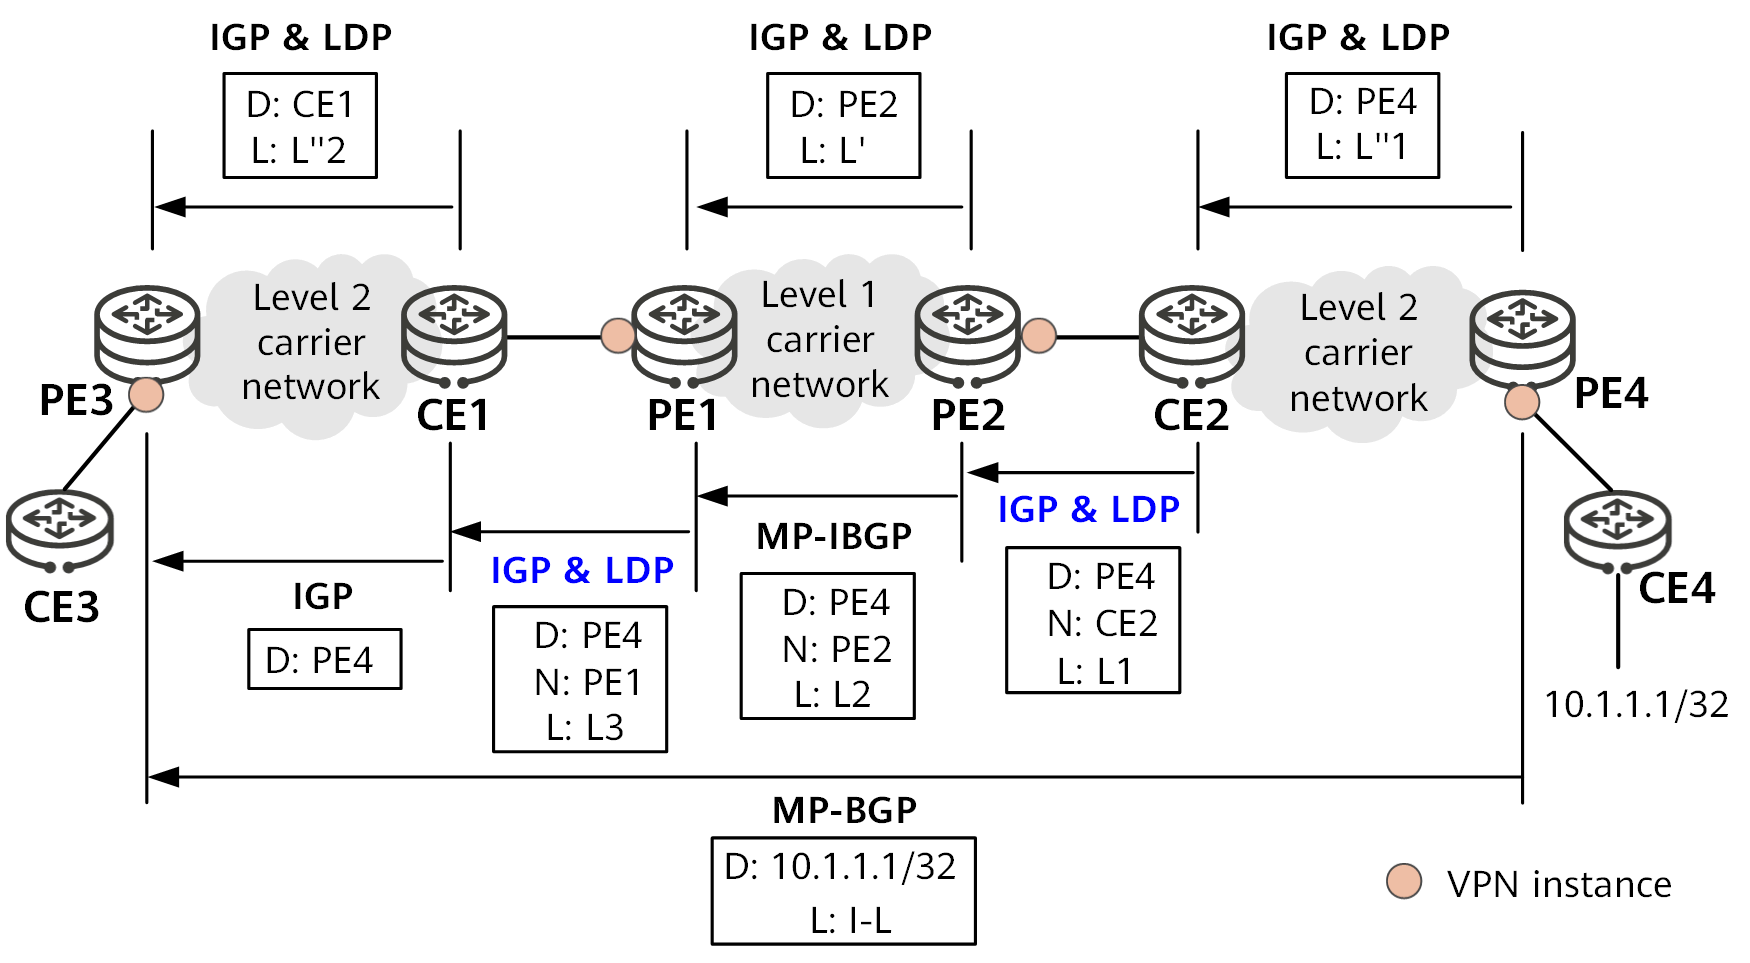 Routing information exchange based on LDP multi-instance